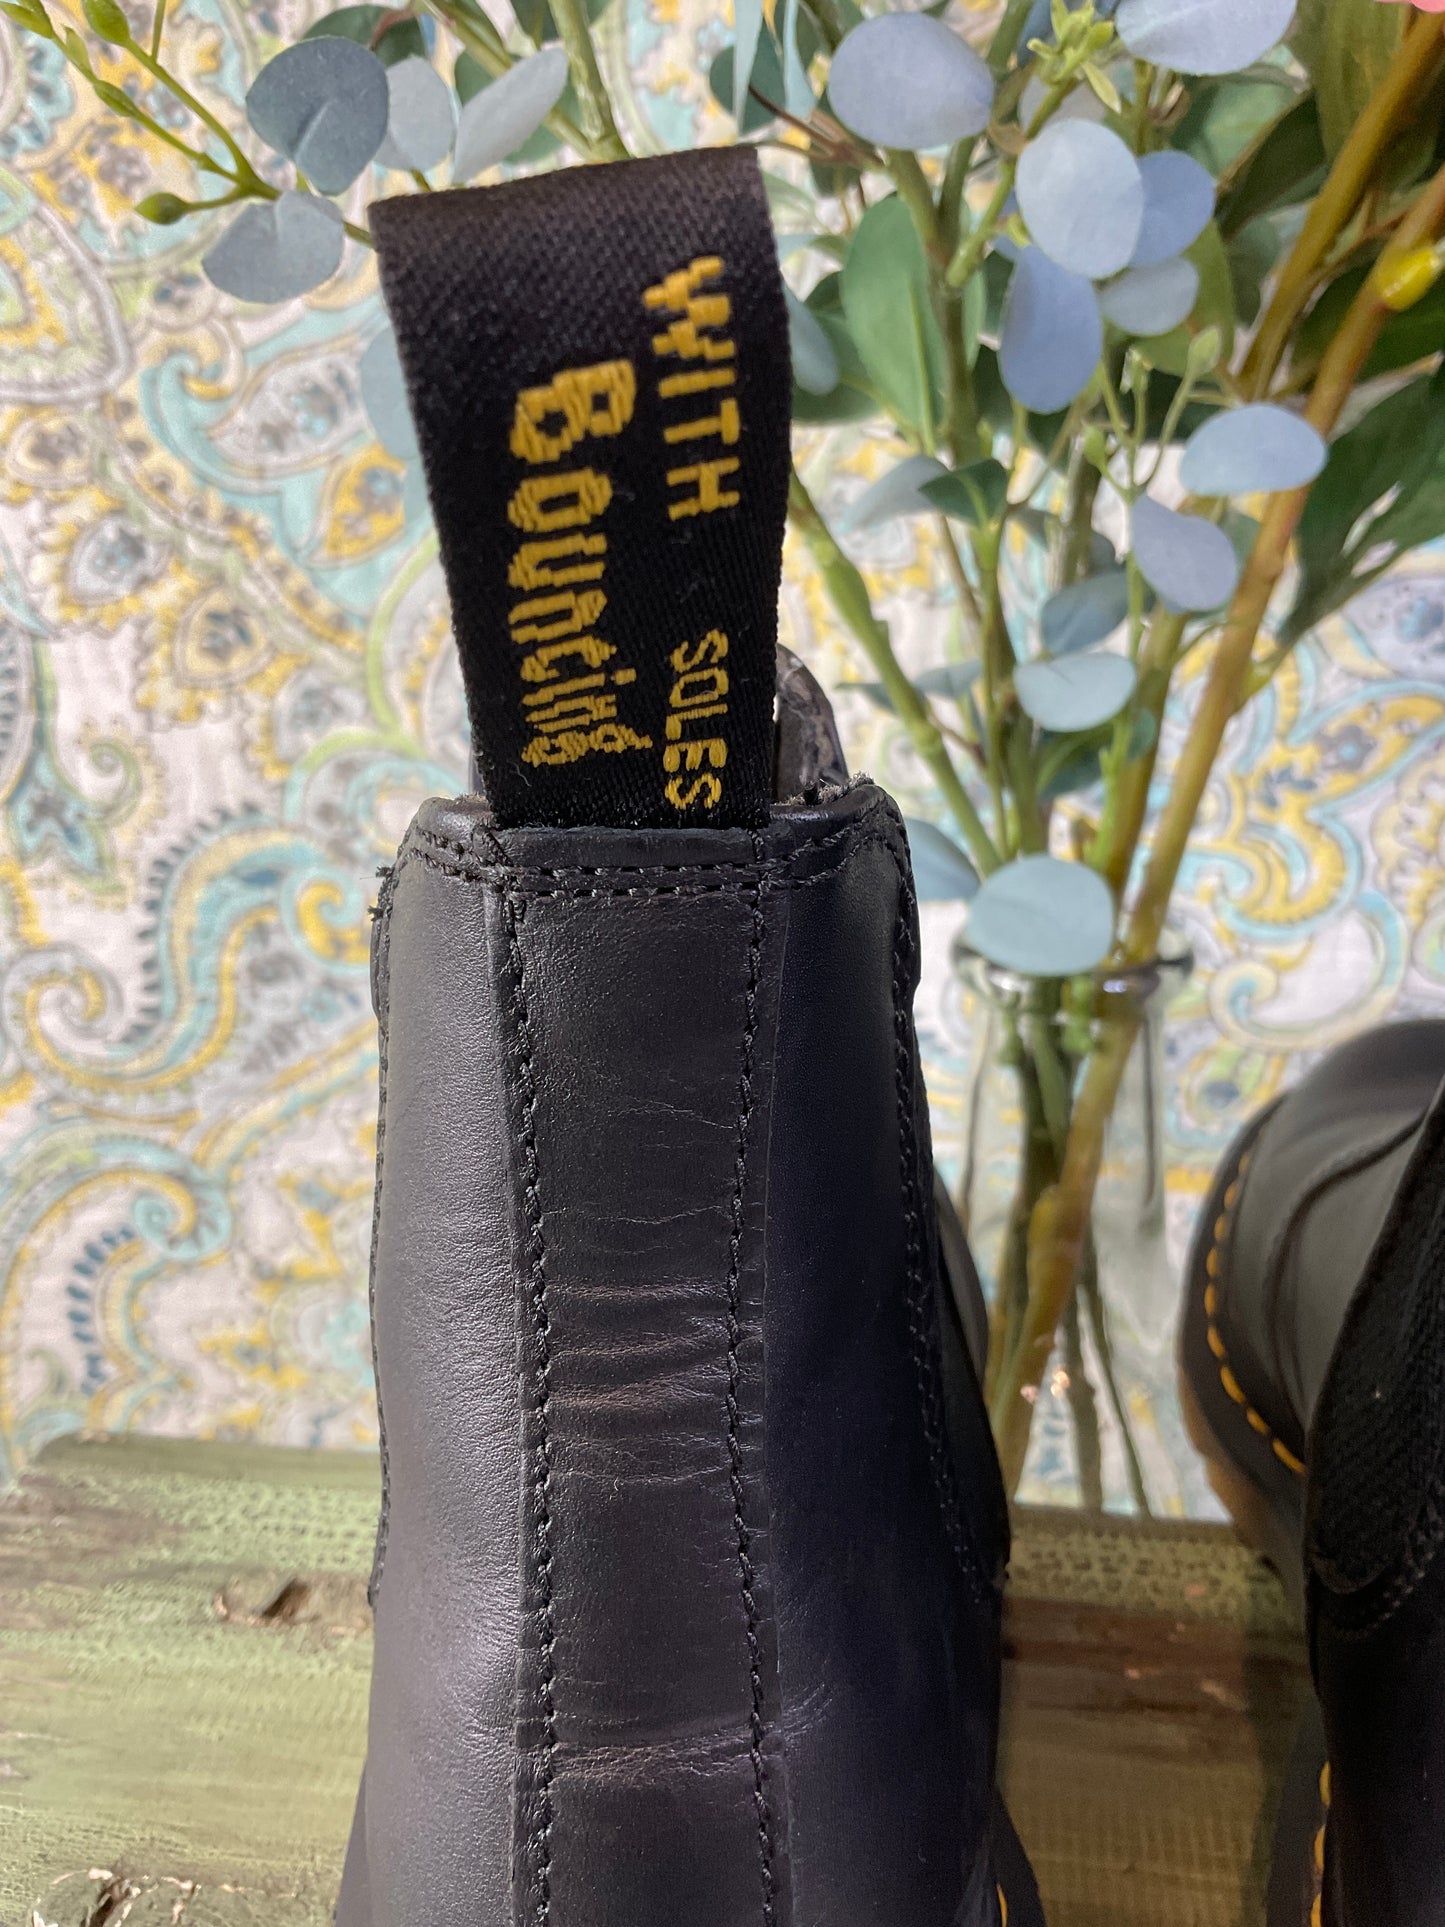 Dr. Martens Airwair Safety Boot, Size US M 9